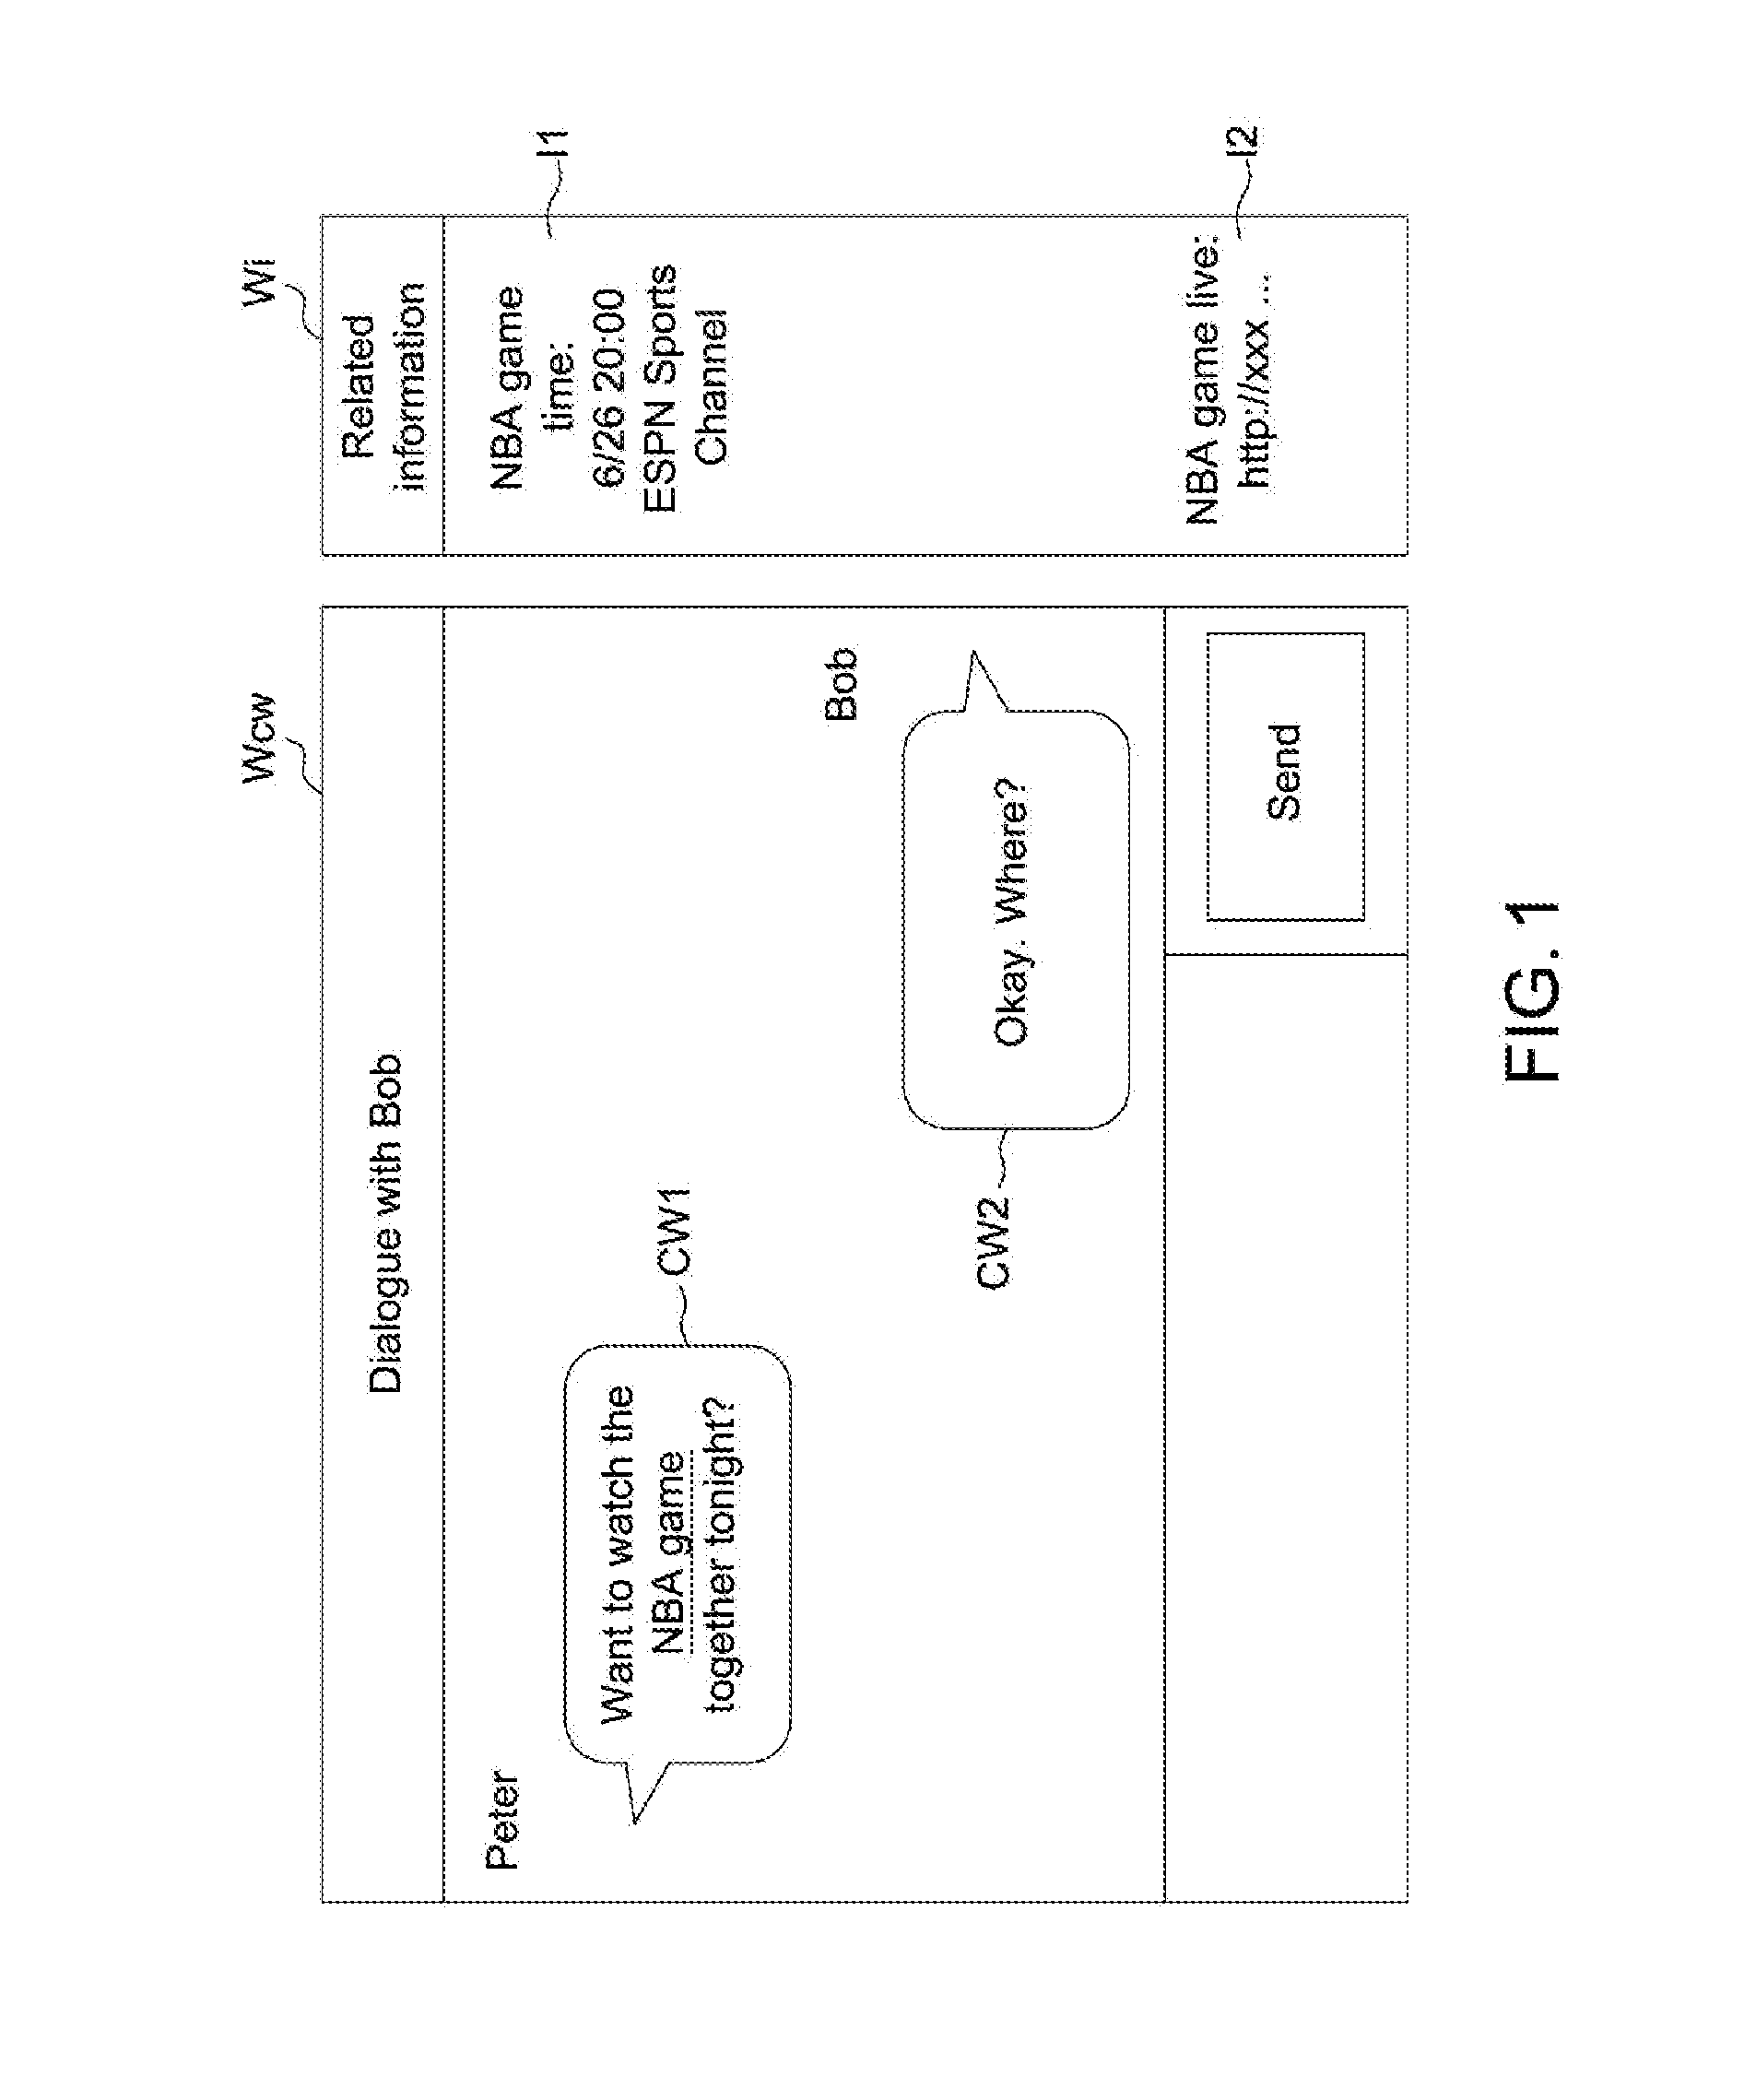 Related information display method and electronic device capable of automatically displaying related information